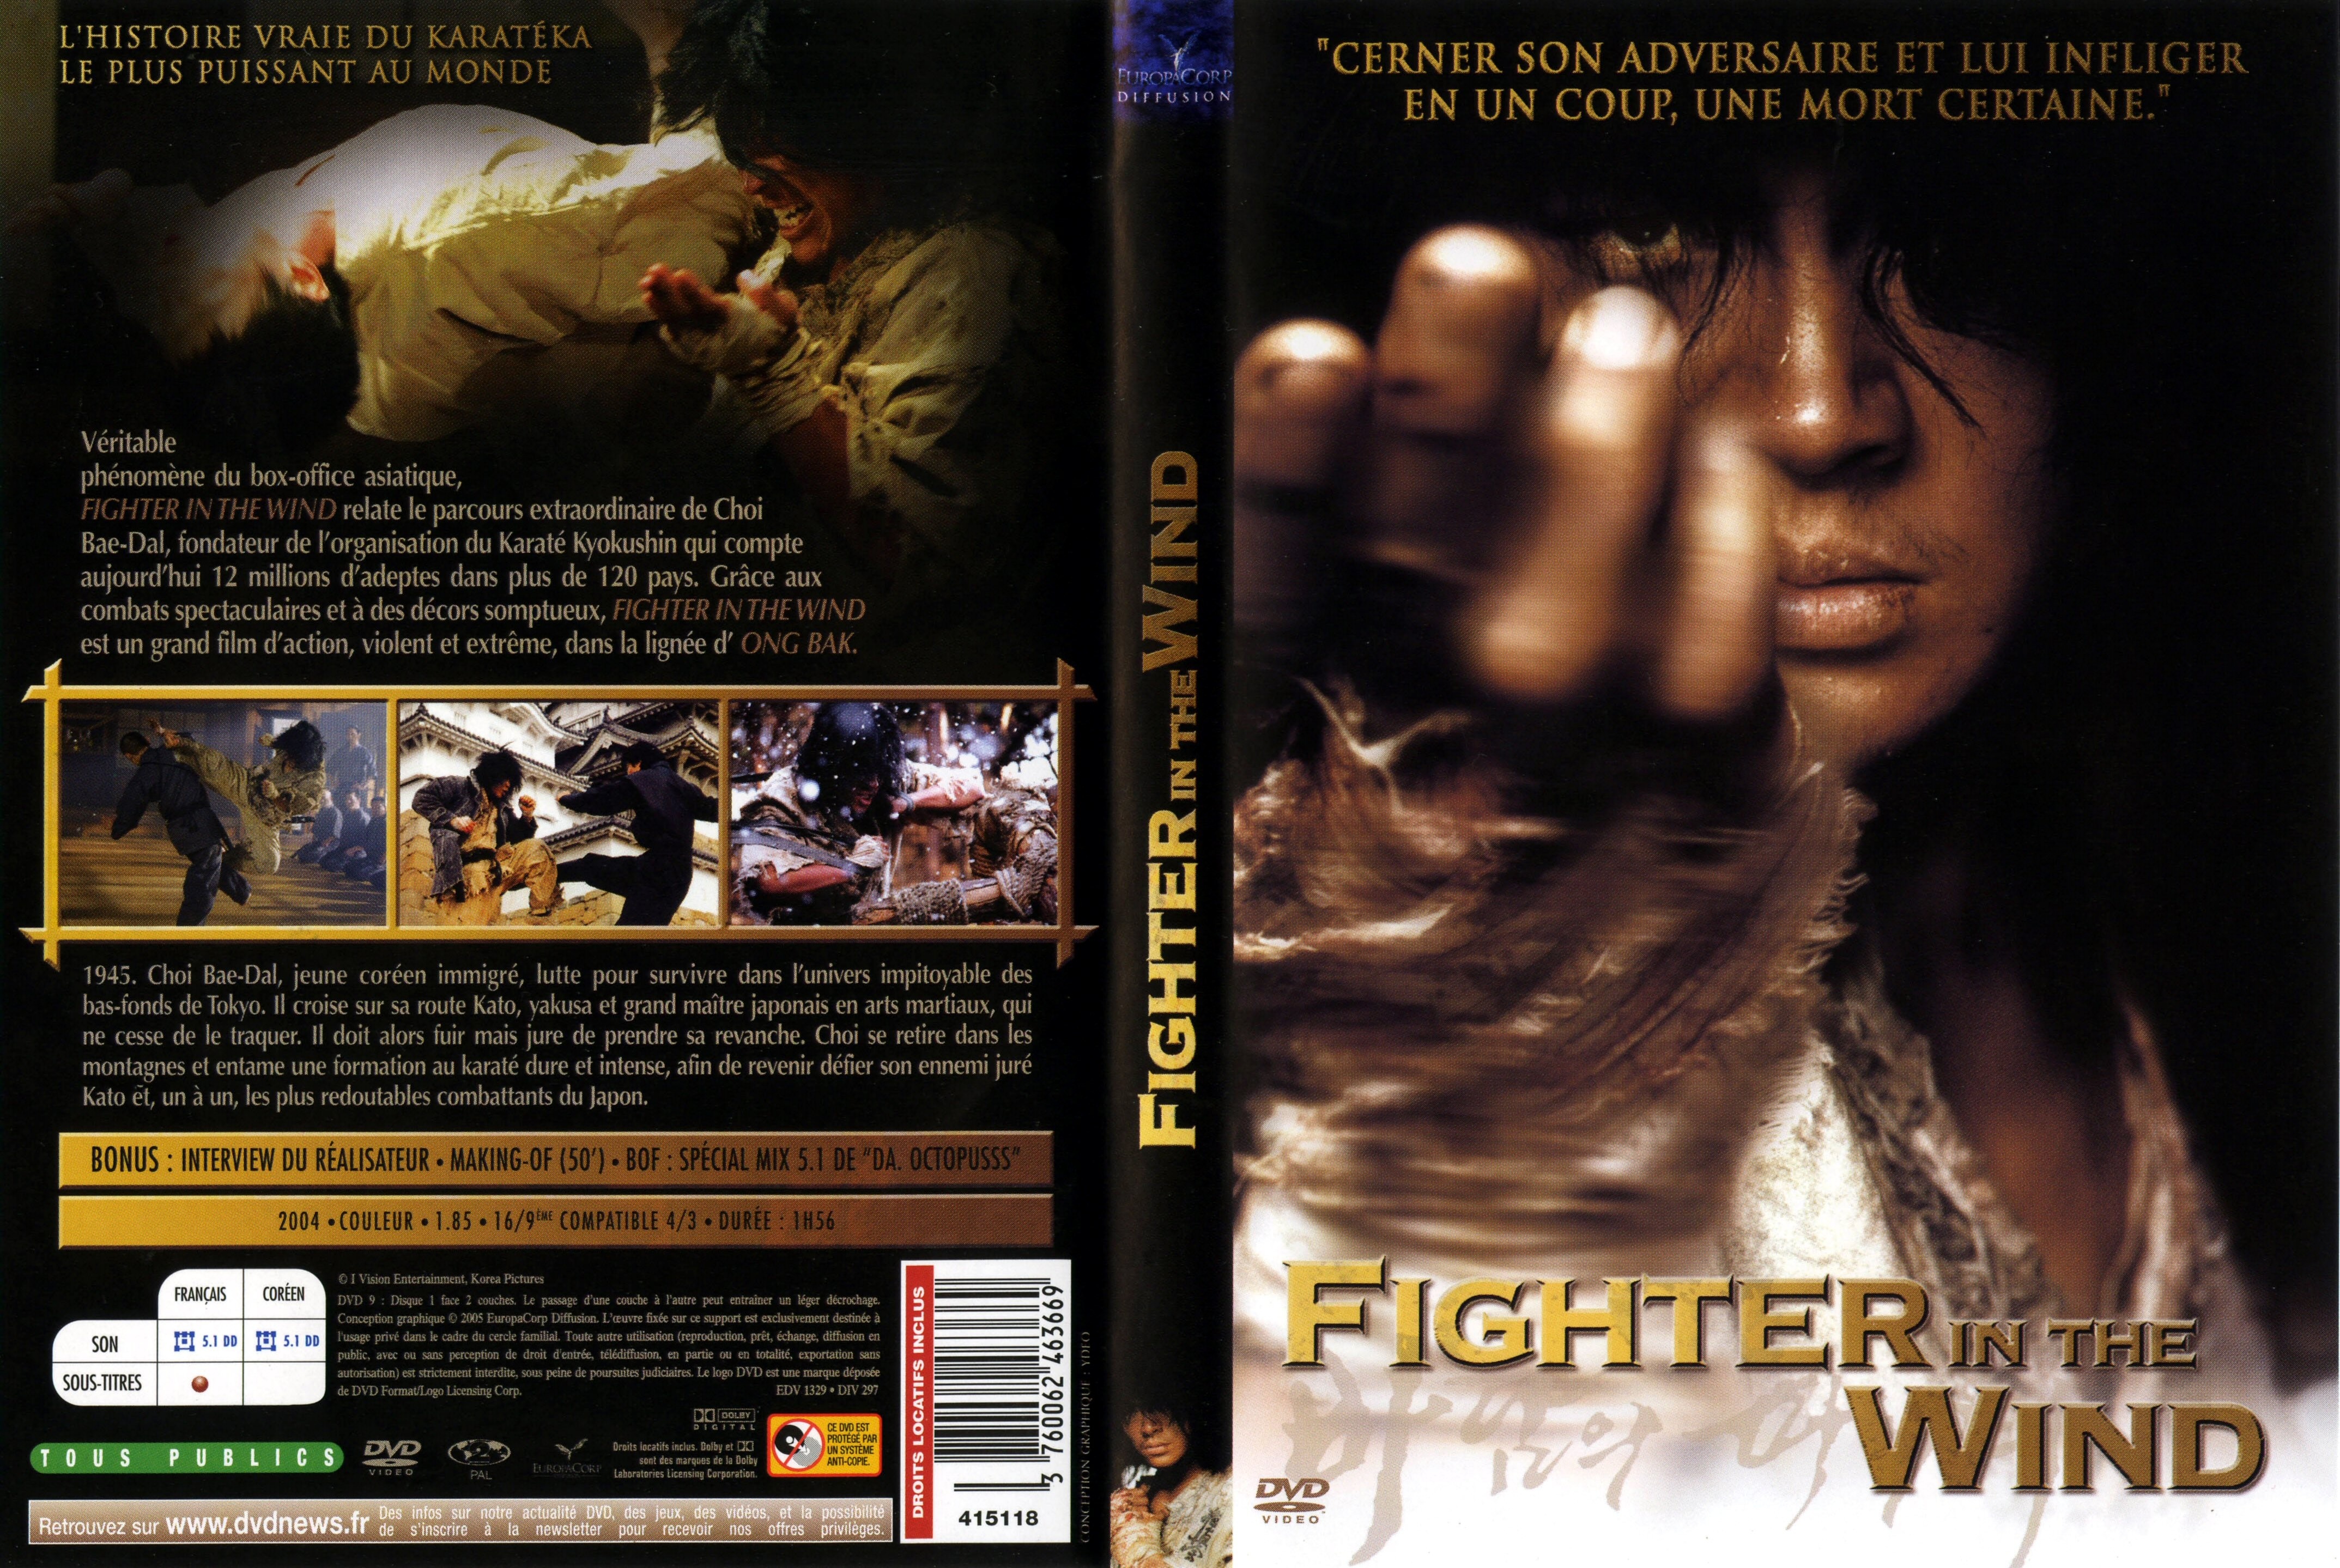 Jaquette DVD Fighter in the wind